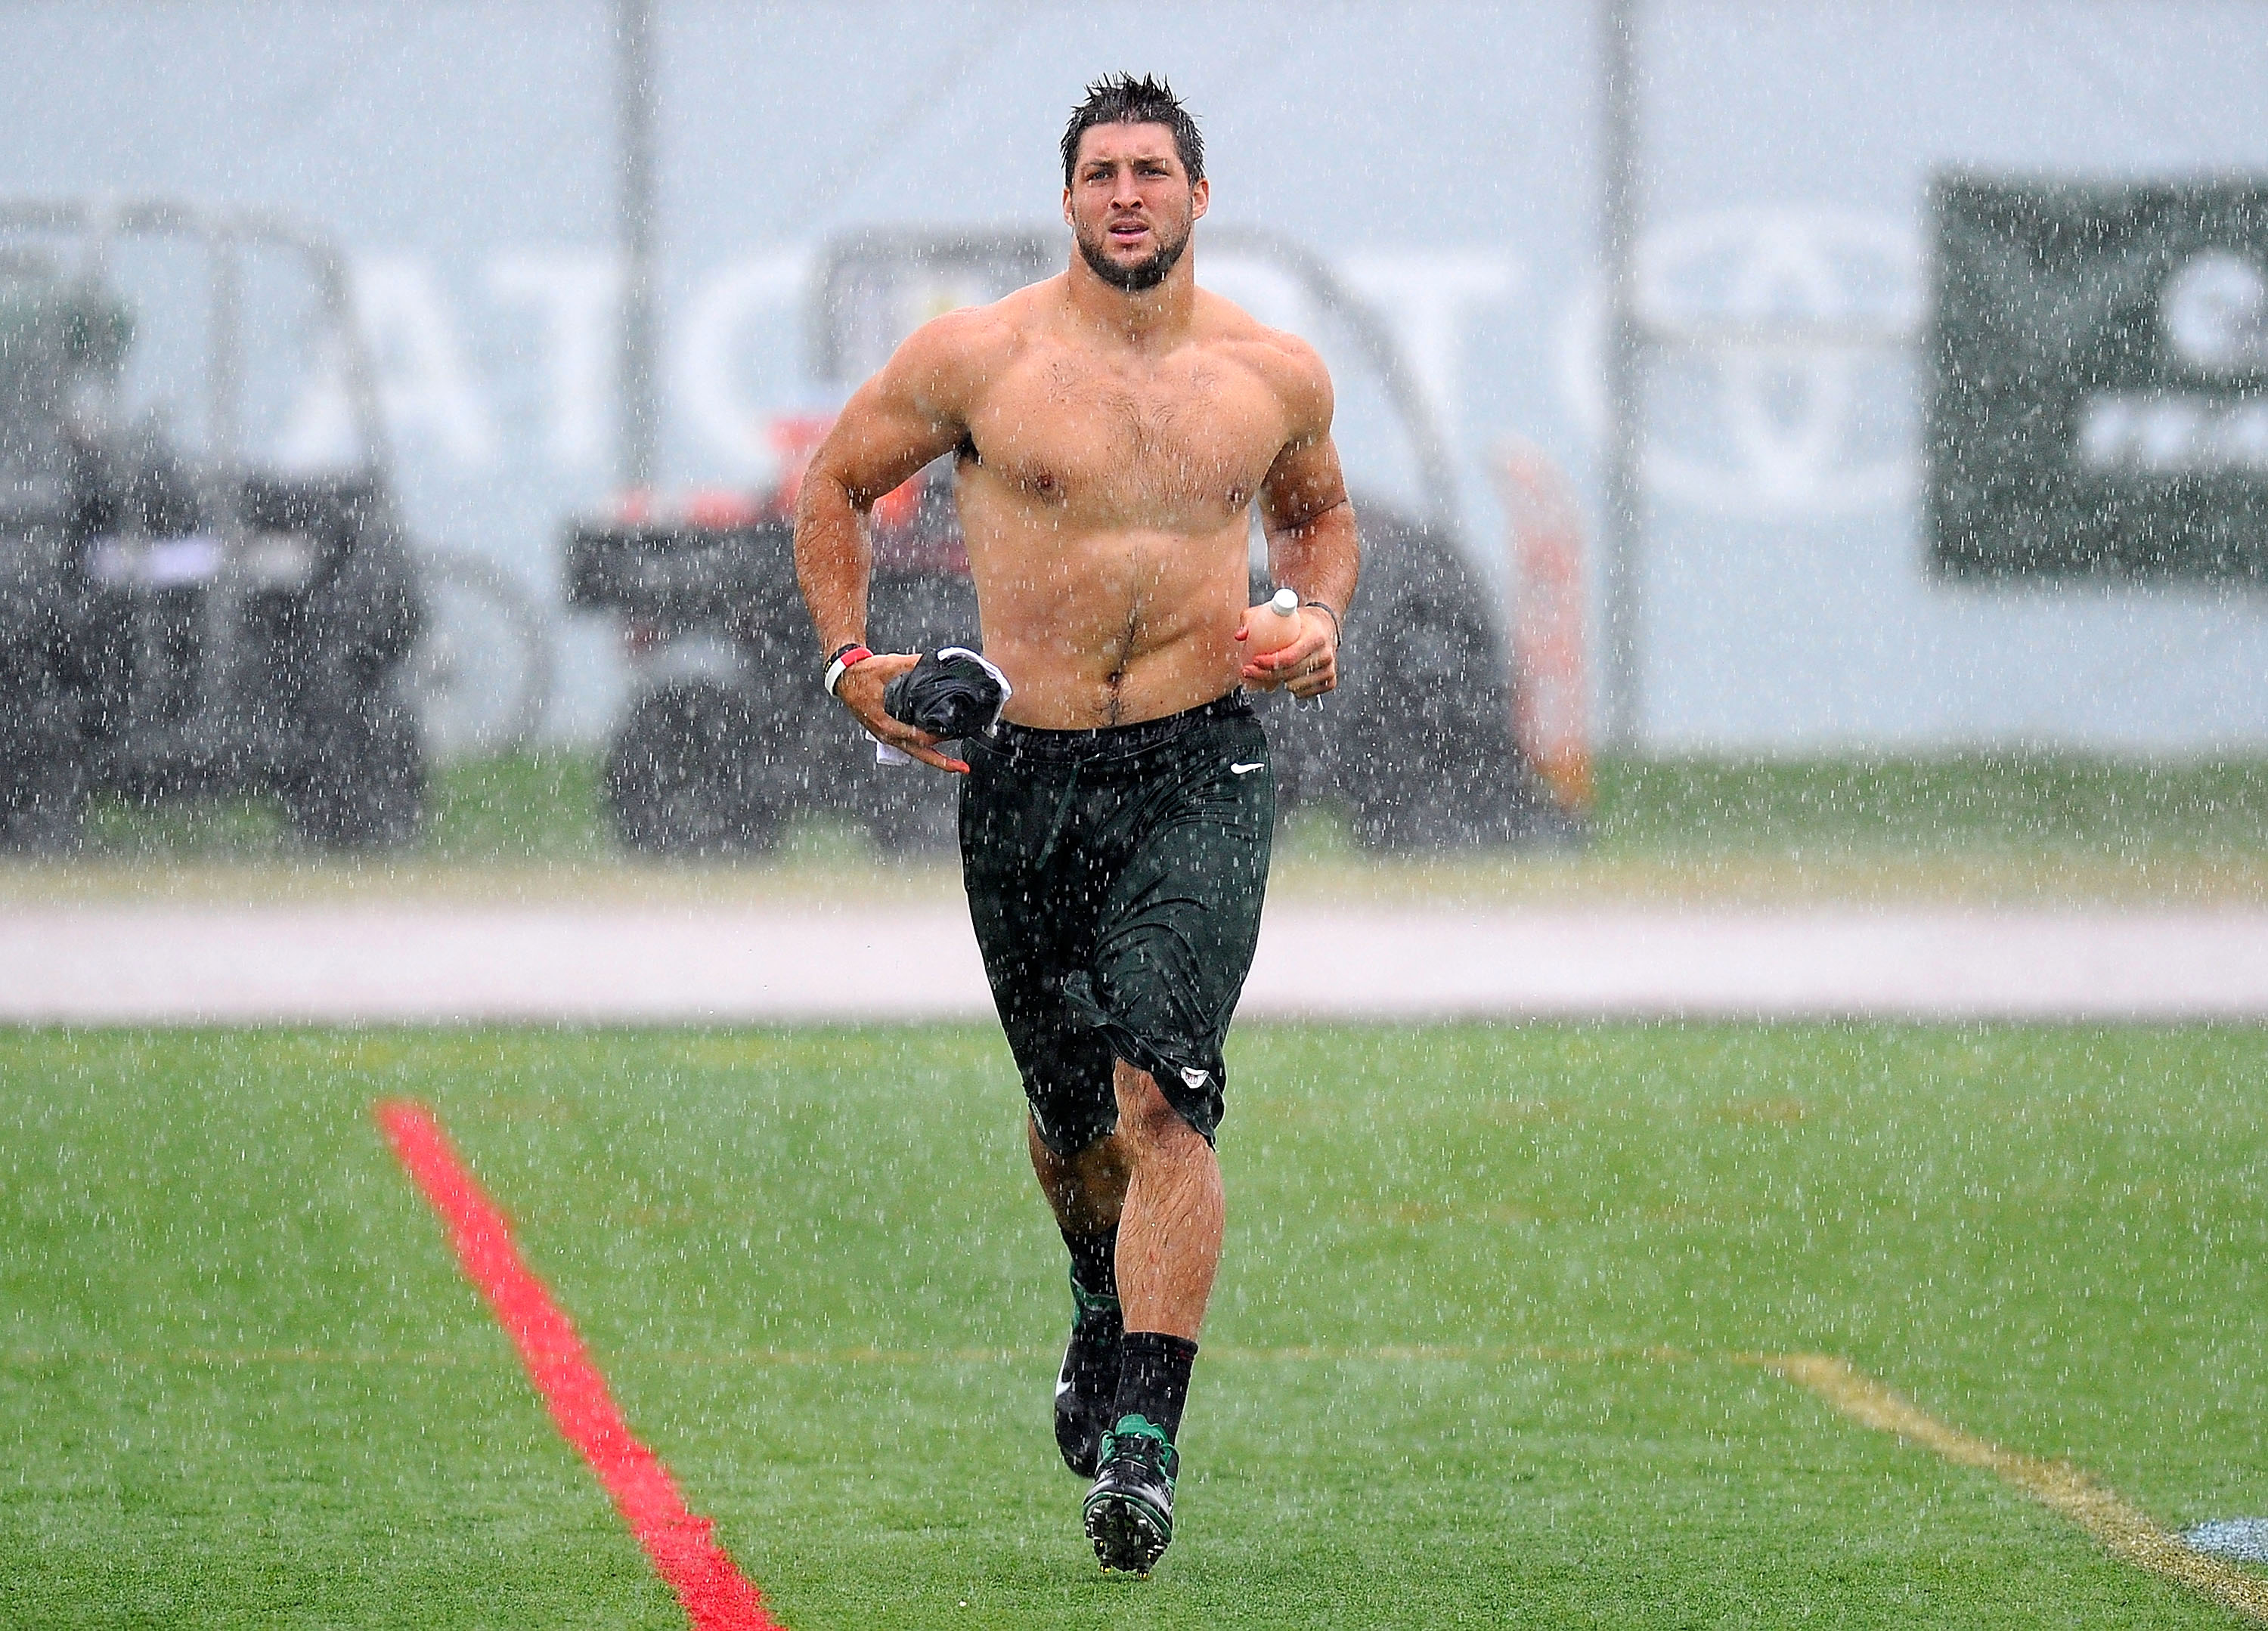 Tim Tebow worked out for the Philadelphia Eagles (seriously)